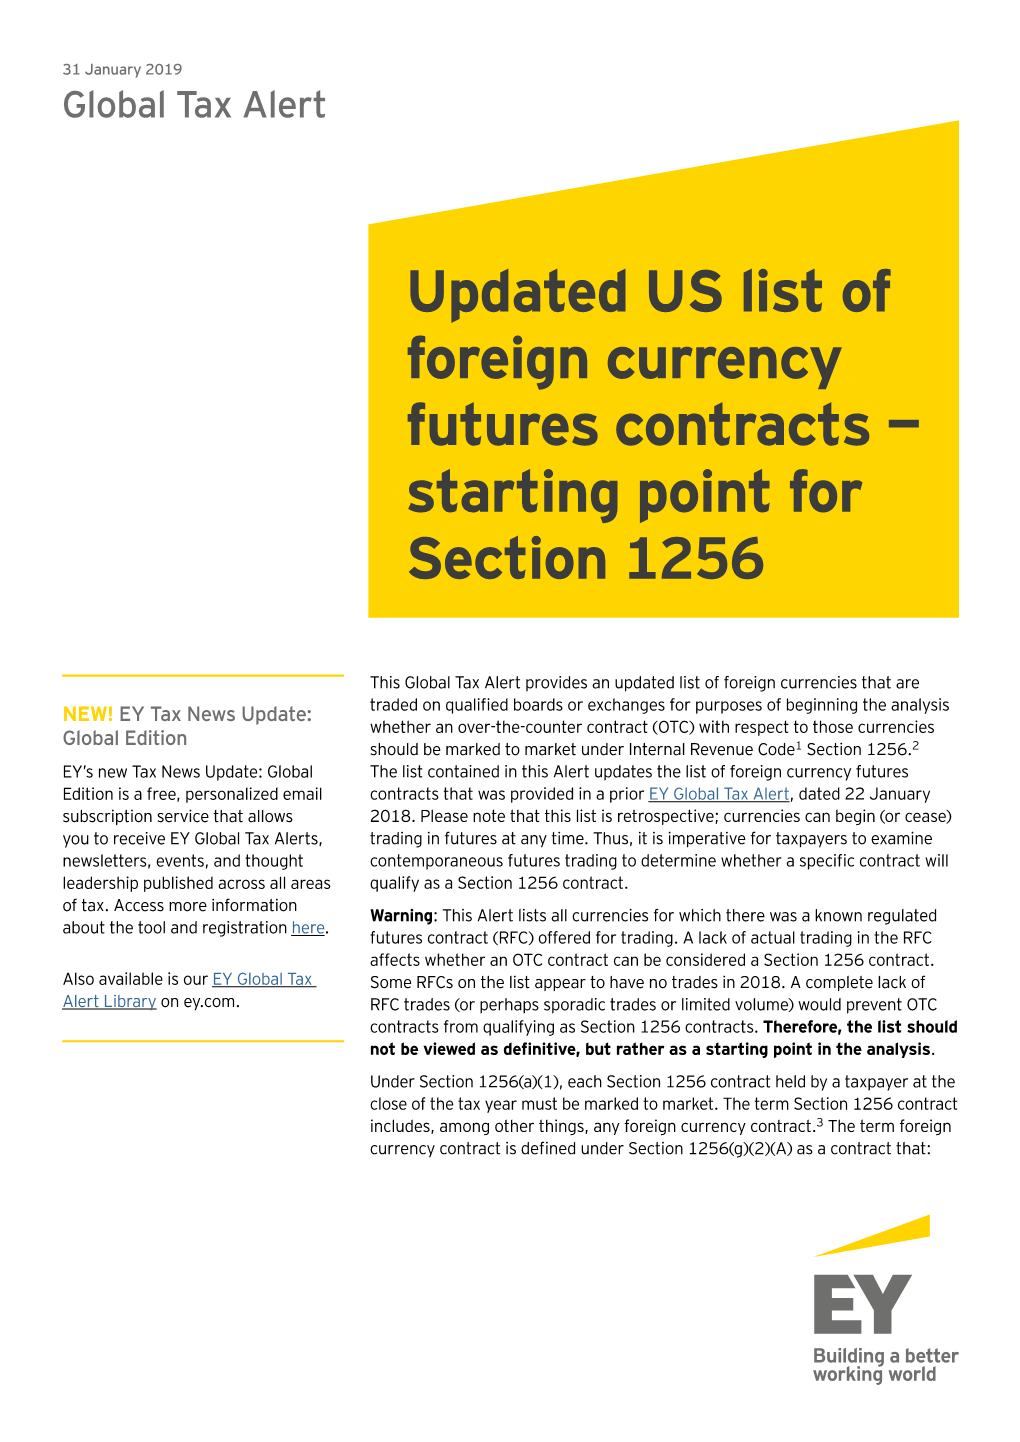 Updated US List of Foreign Currency Futures Contracts — Starting Point for Section 1256